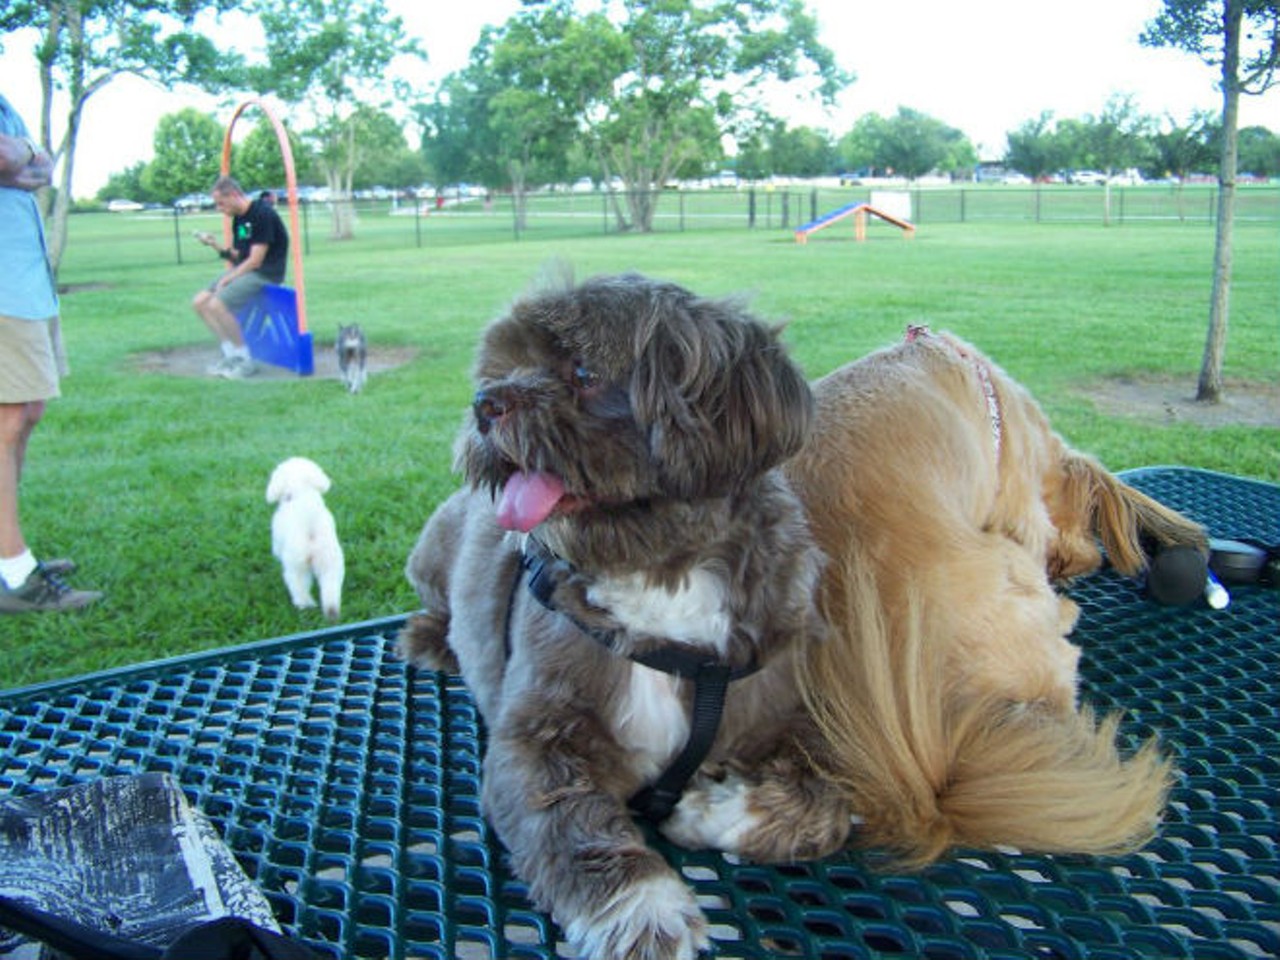 Conway
Conway might not seem like an immediate date destination, but it has plenty to offer for everyone. Sip on some beers at Rogue Pub or  before heading to Barber Dog Park for a lively time. When hunger strikes, the best place to grab a meal is definitely Cork and Fork.
Photo of Barber Dog Park via Yelp